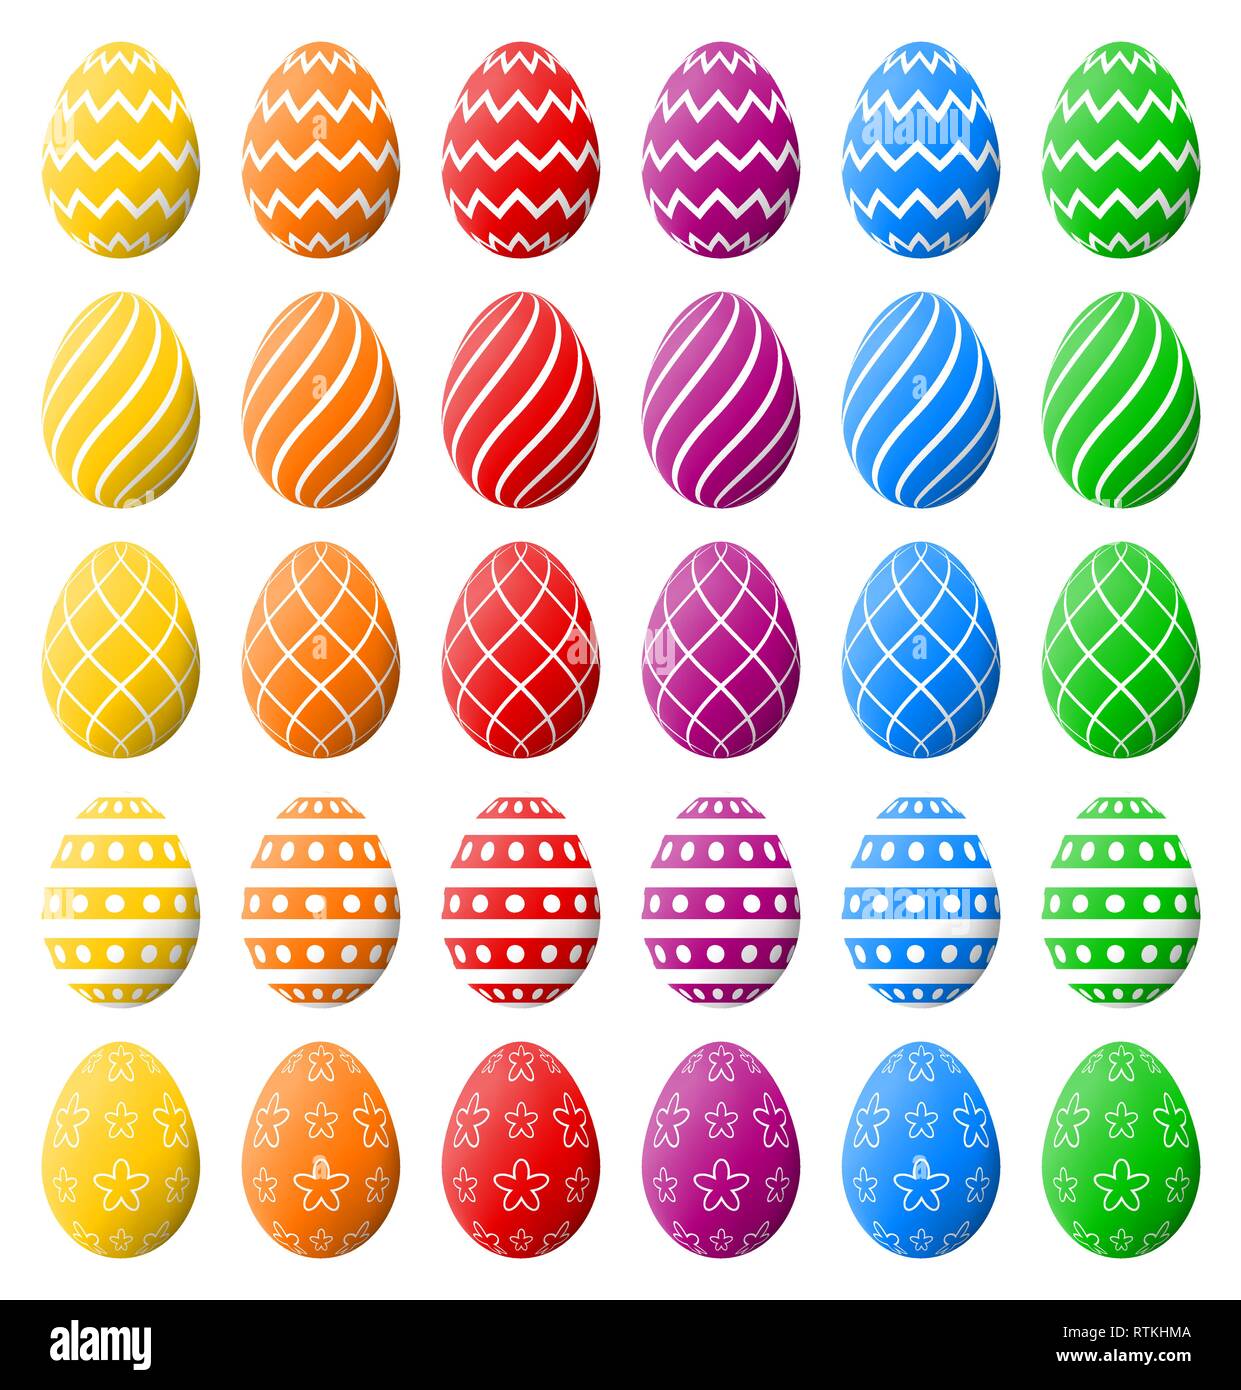 Beautiful Easter eggs collection. Various patterns and colors - high quality vector. Stock Vector